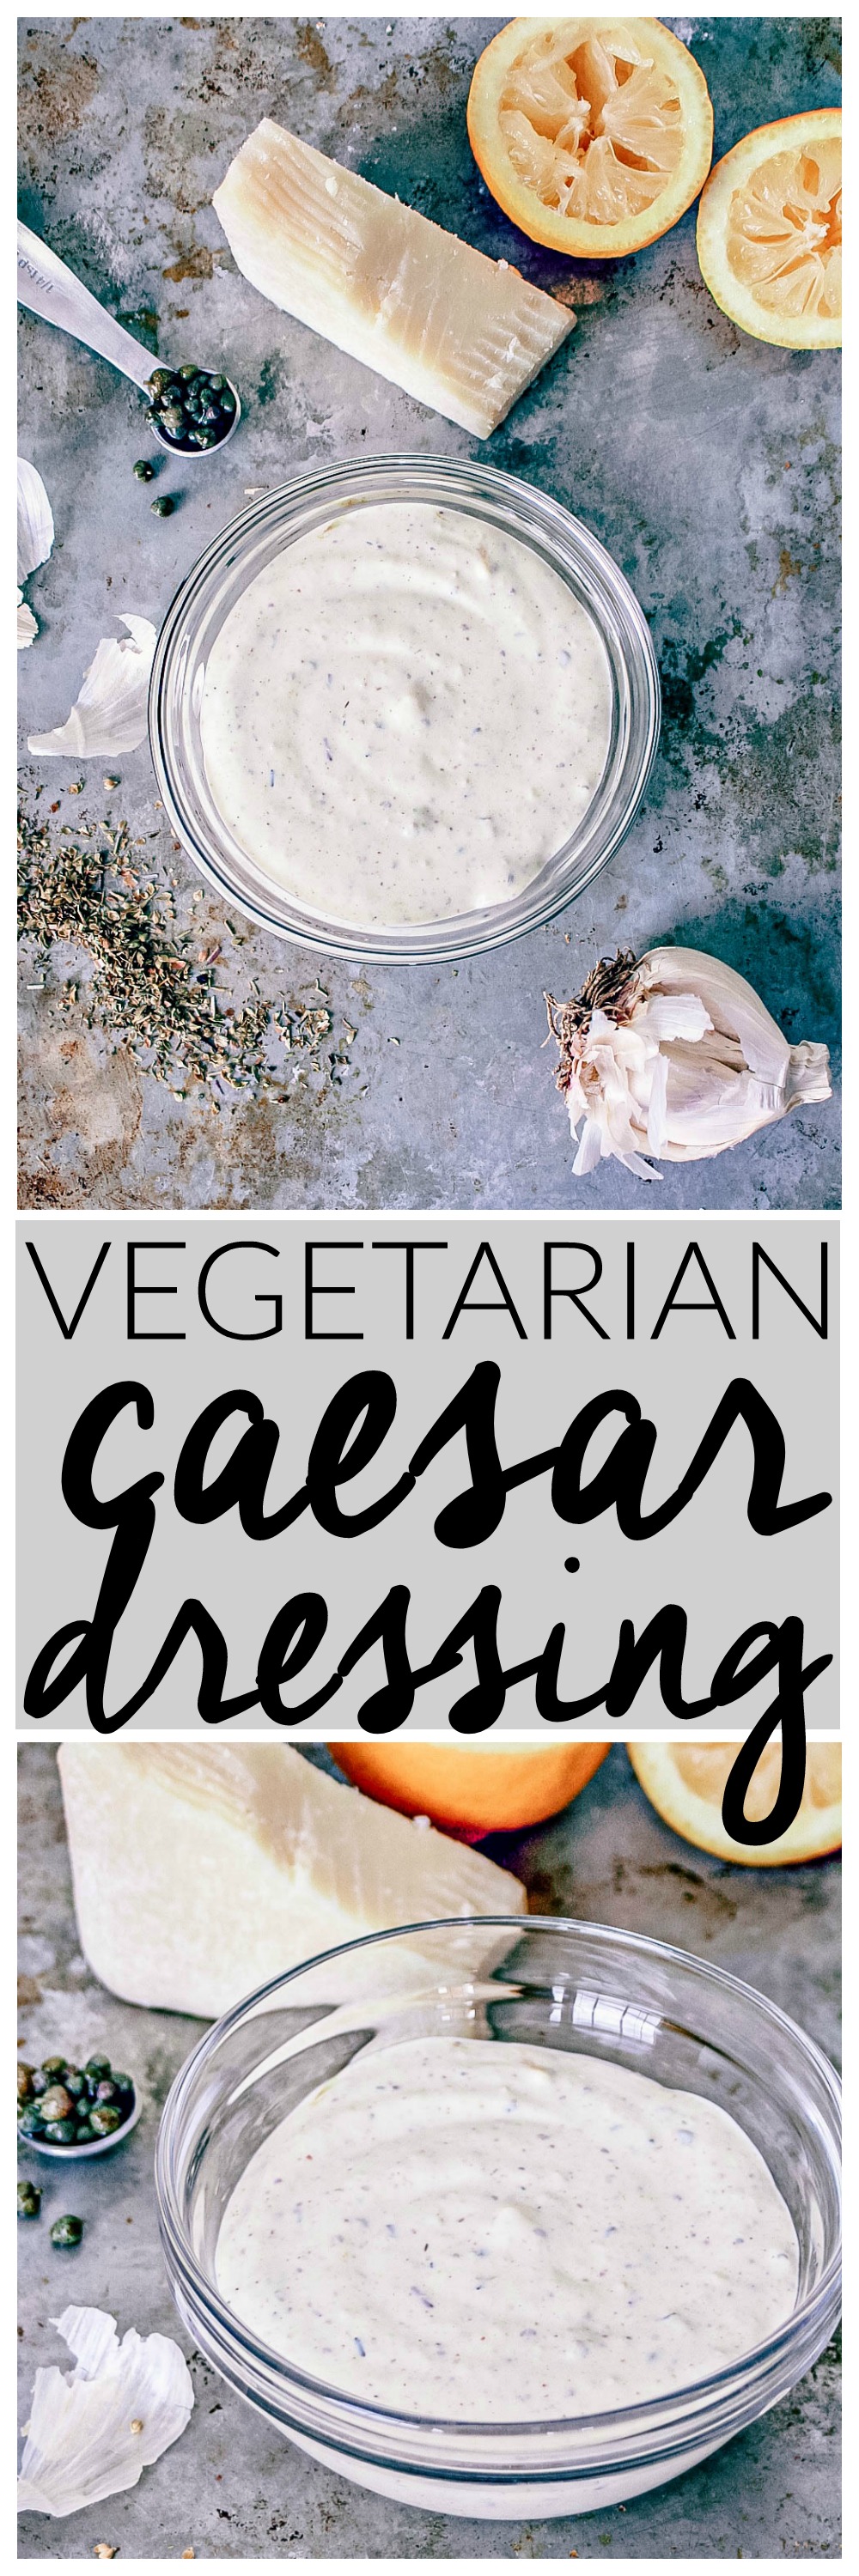 Homemade Vegetarian Caesar Dressing | Killing Thyme — This homespun recipe uses capers instead of anchovies so that vegetarians can indulge.